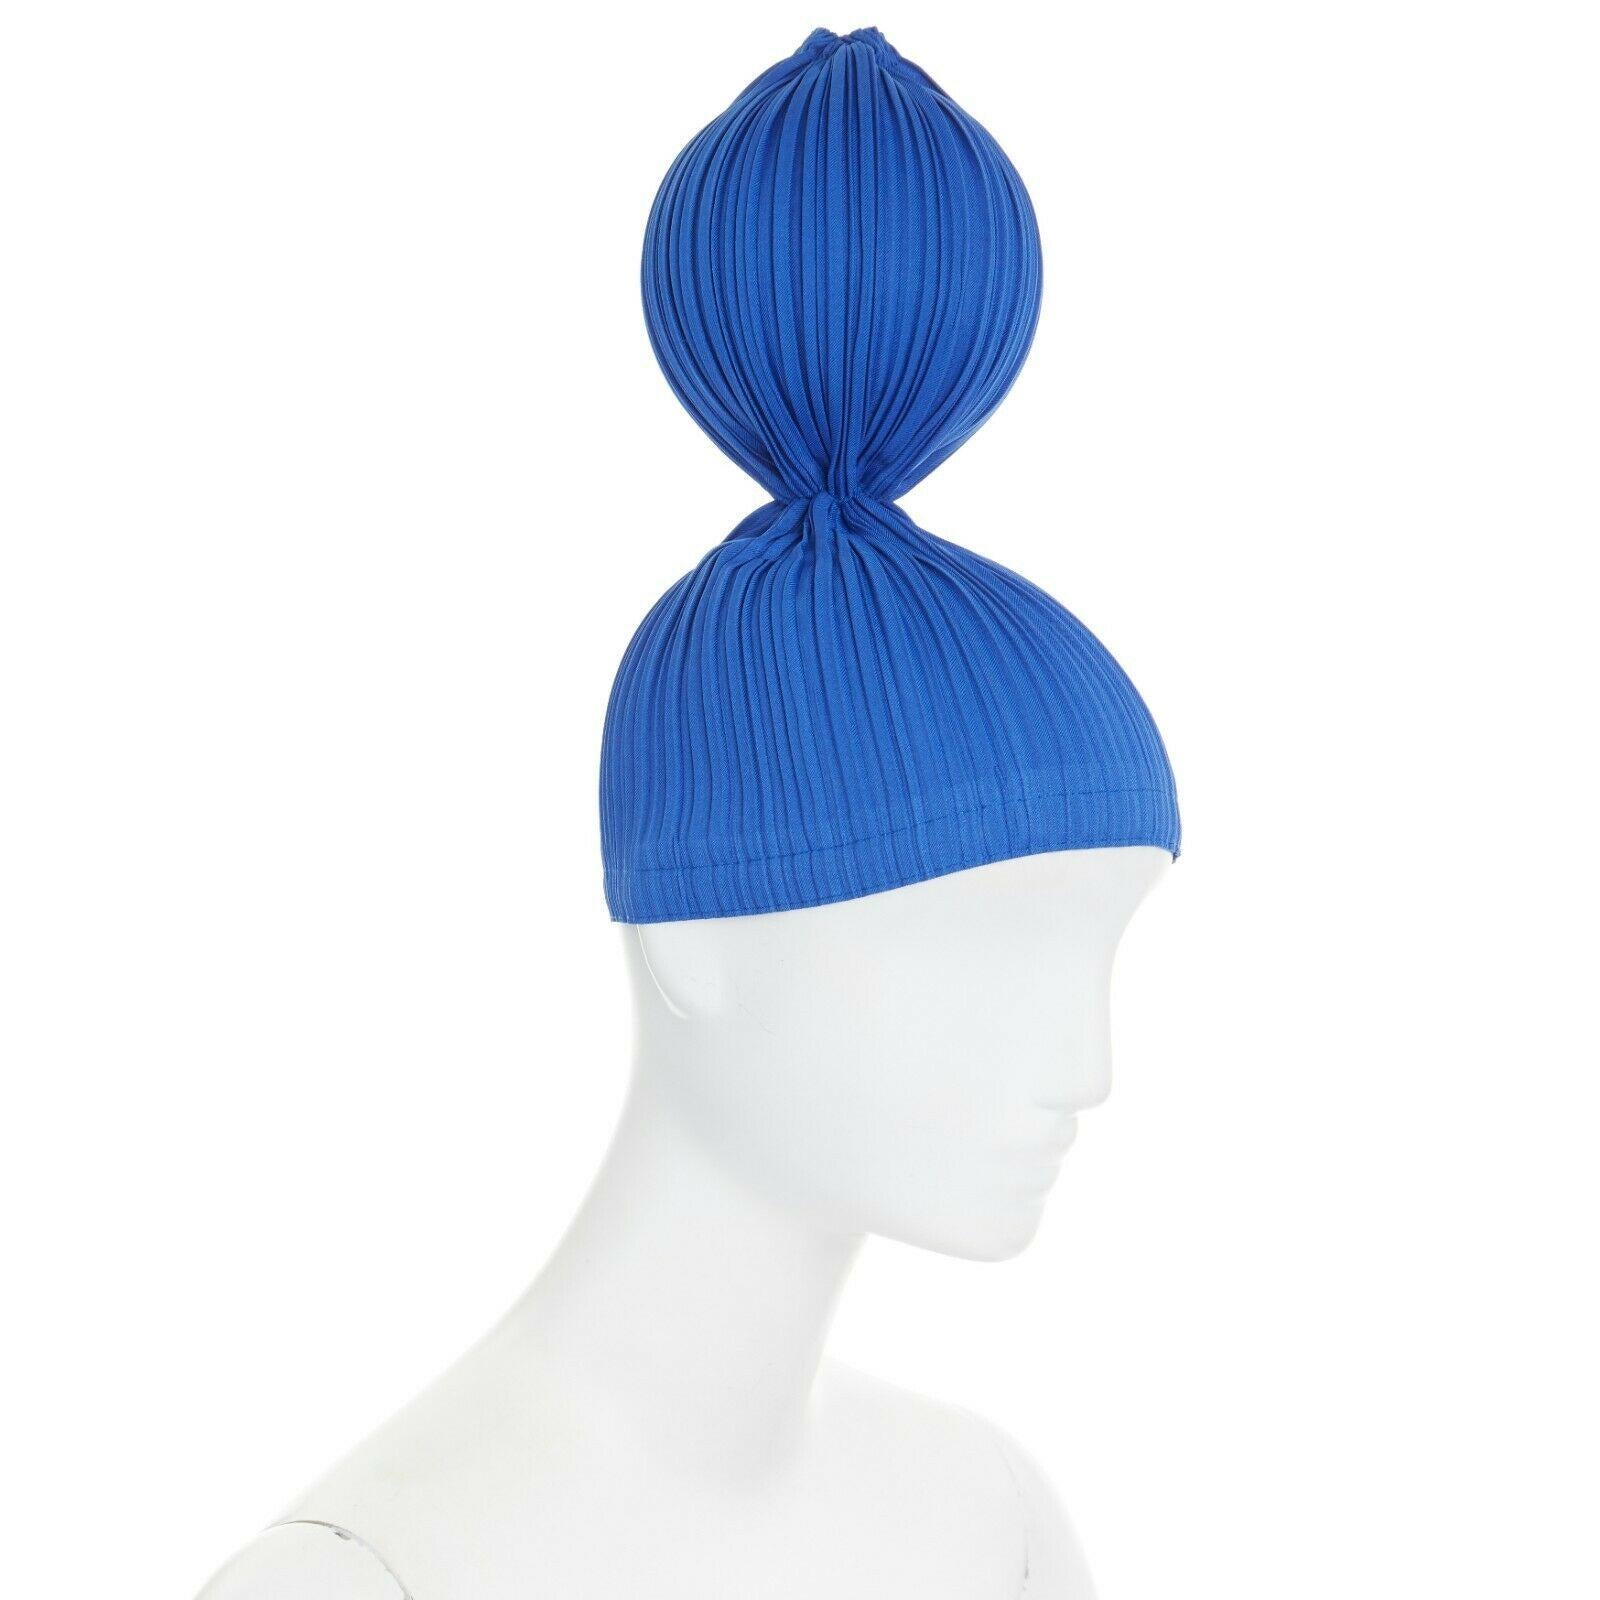 ISSEY MIYAKE PLEATS PLEASE
Signature pleated polyester. Blue. Single spherical ball bobble design. Stretch fit. Statement party hat. Grosgrain trimmed along lining. Made in Japan.

CONDITION
New without brand tag. This is a Issey Miyake Pleats